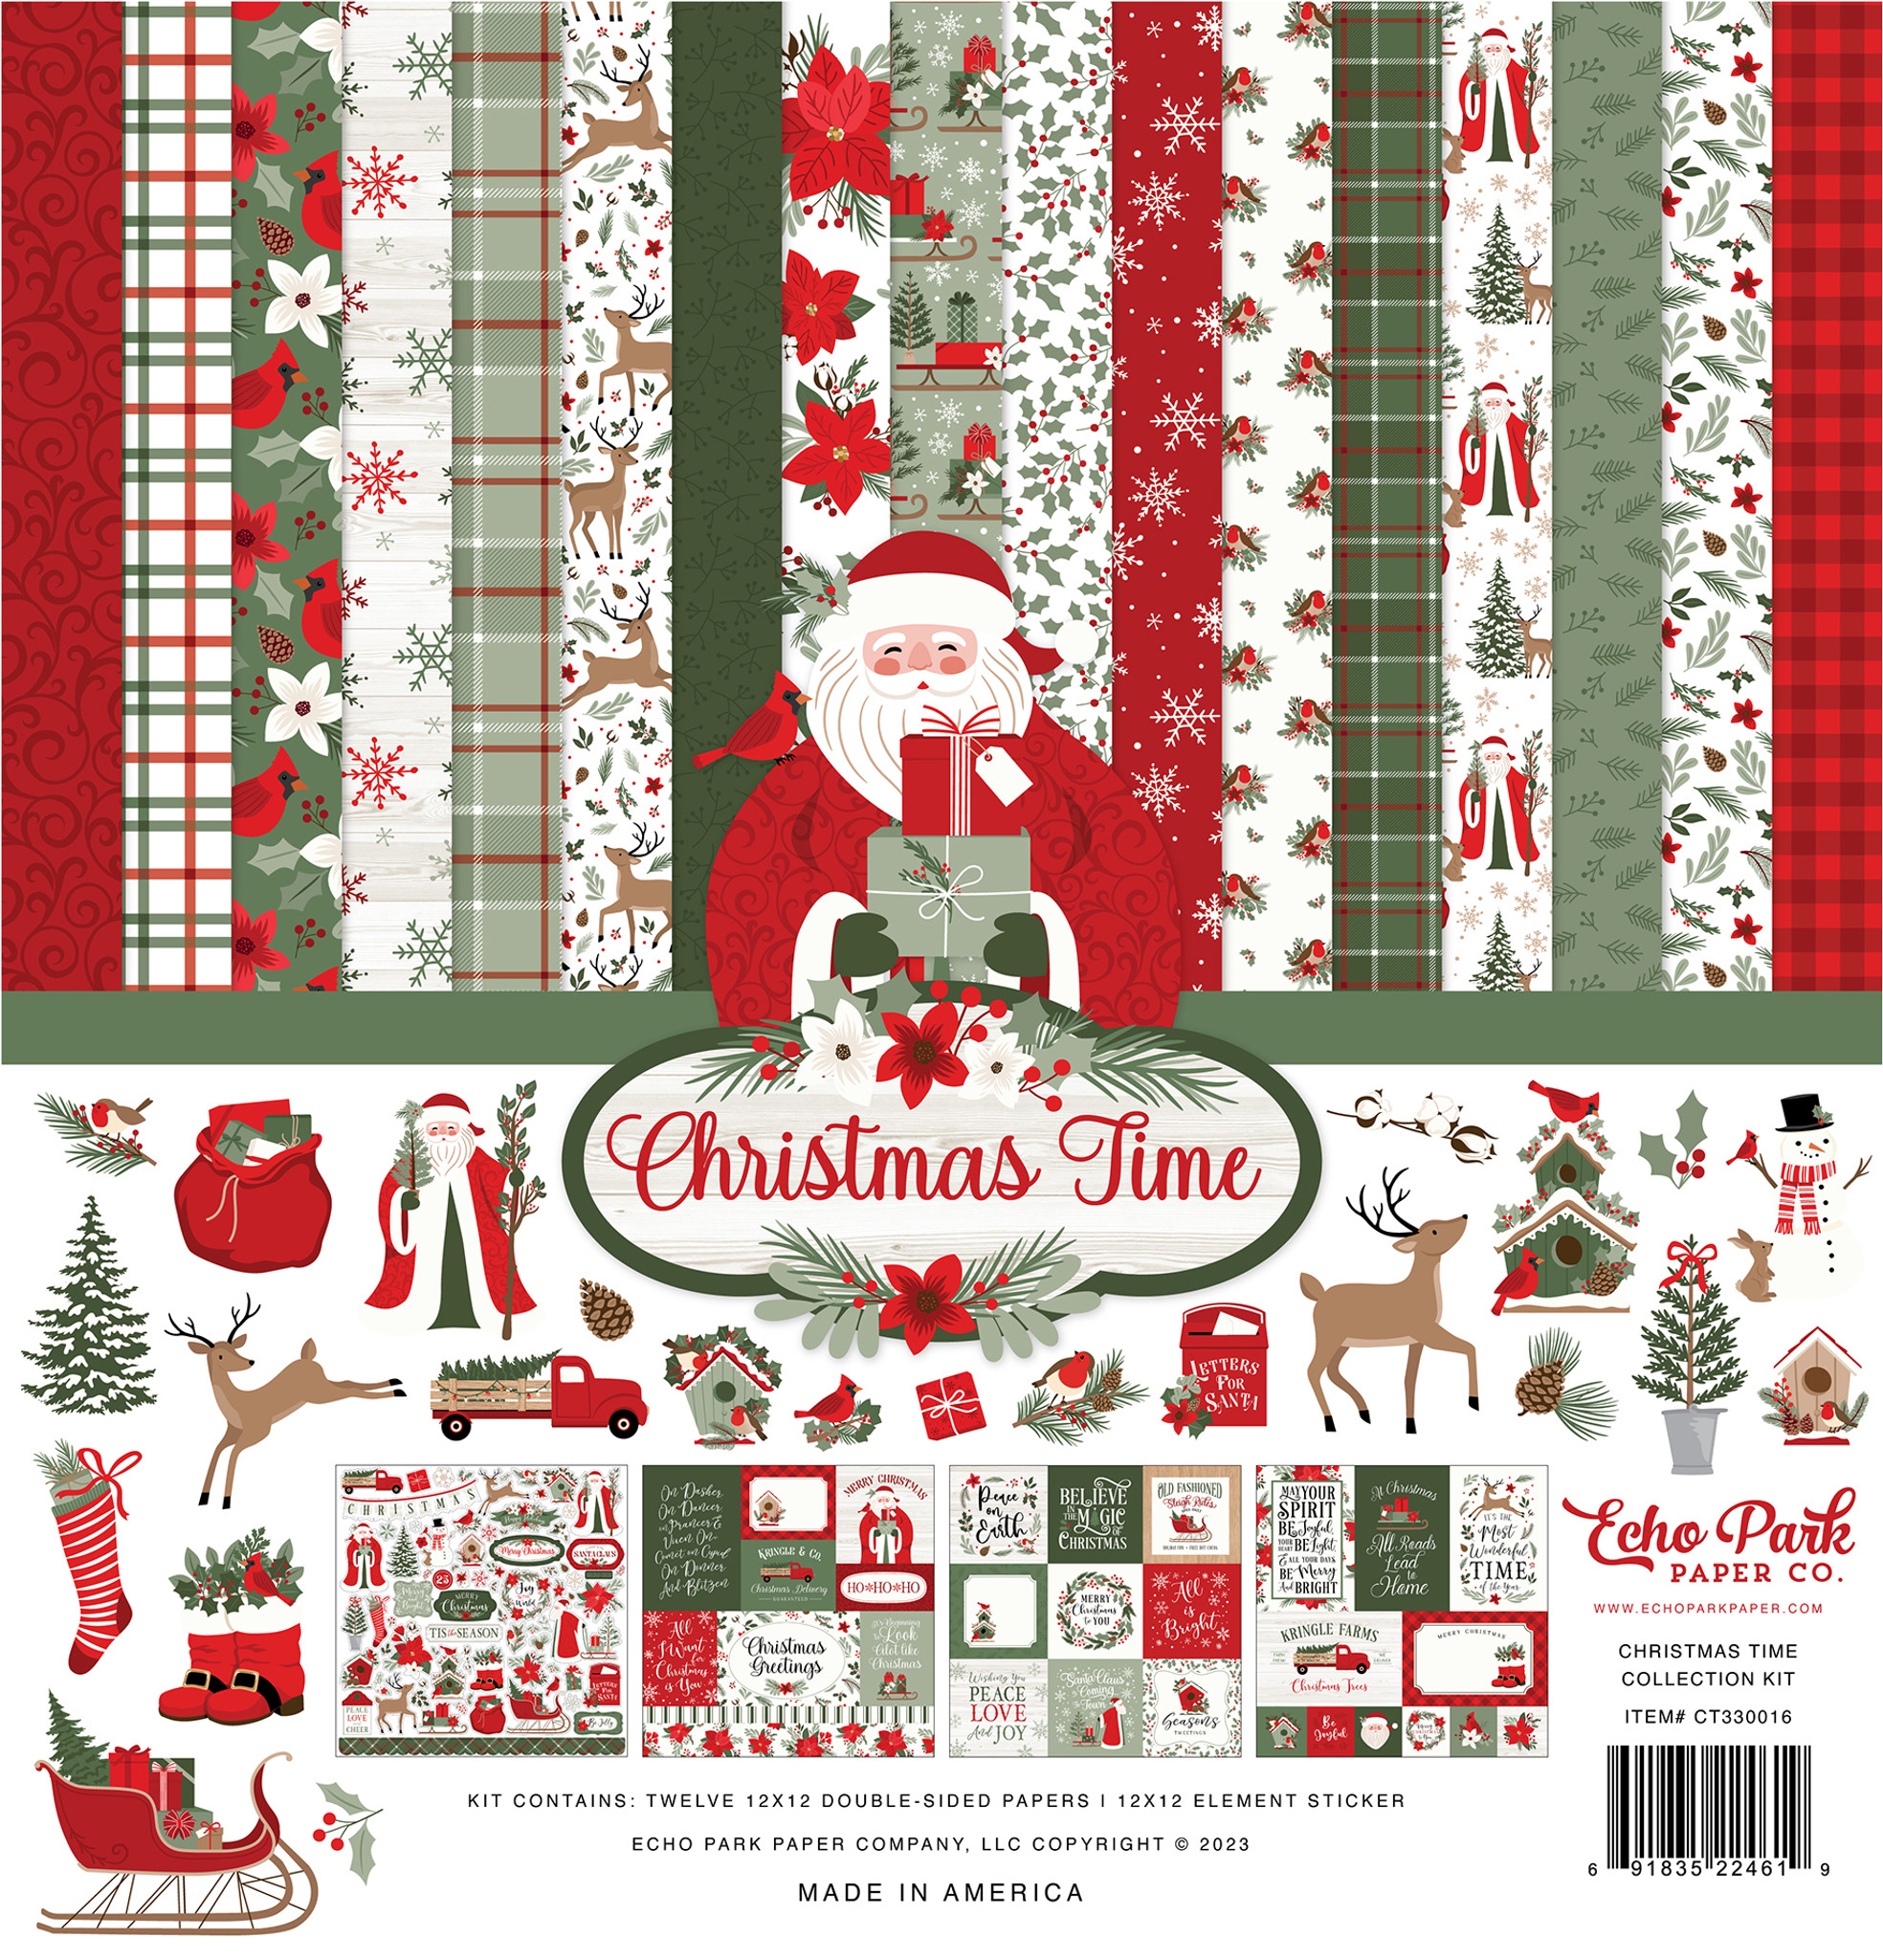 Christmas Time: 4x6 Journaling Cards 12x12 Patterned Paper - Echo Park  Paper Co.